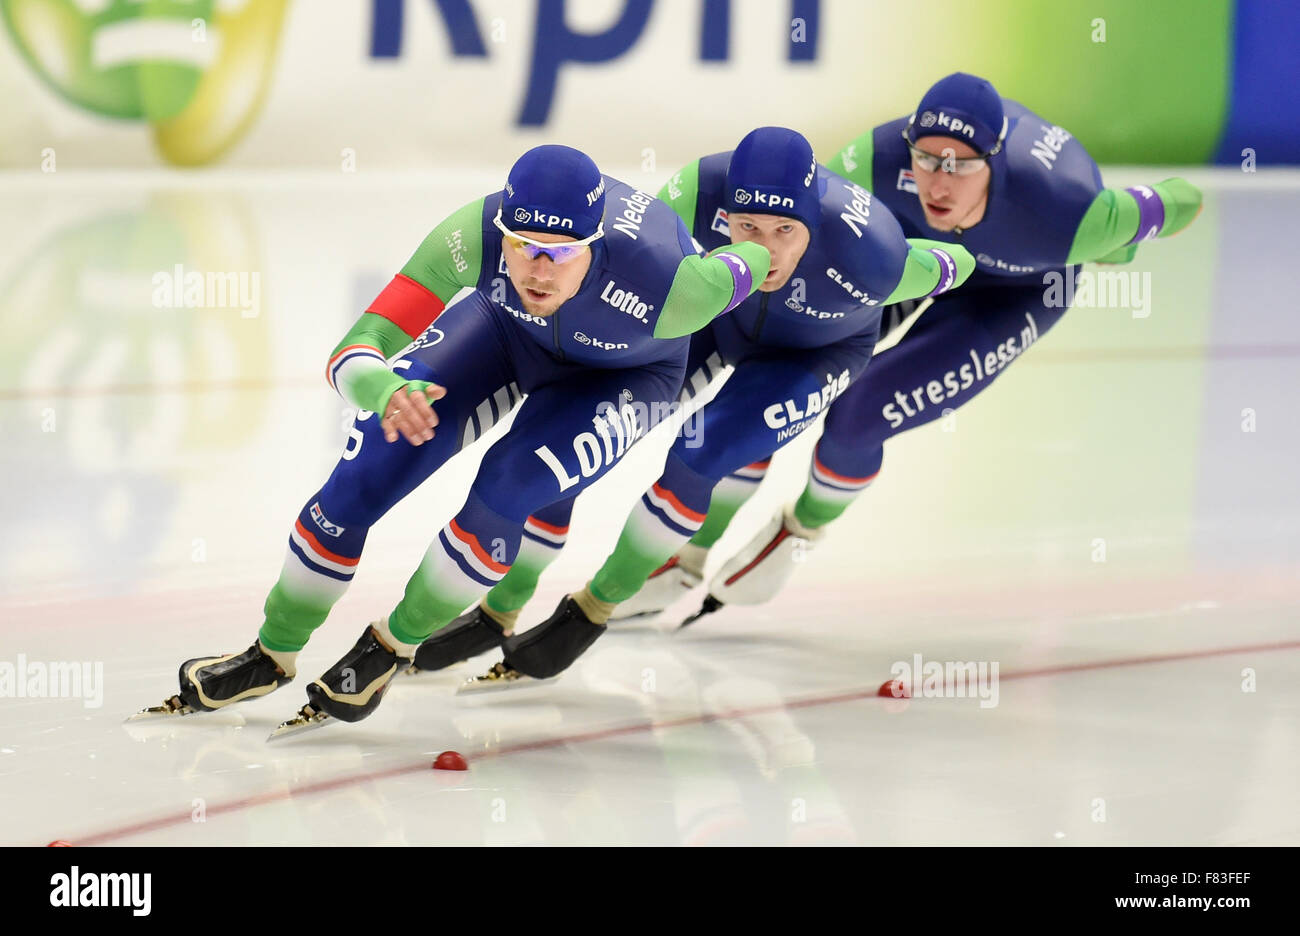 Inzell, Germany. 4th Dec, 2015. The Netherlands' Douwe de Vries (l-r), Arjan Stroetinga and Jan Blokhuijsen in action during the men's team competition of the speed skating world cup in the Max-Aicher-Arena in Inzell, Germany, 4 December 2015. The Netherlands came 1st. PHOTO: TOBIAS HASE/DPA/Alamy Live News Stock Photo